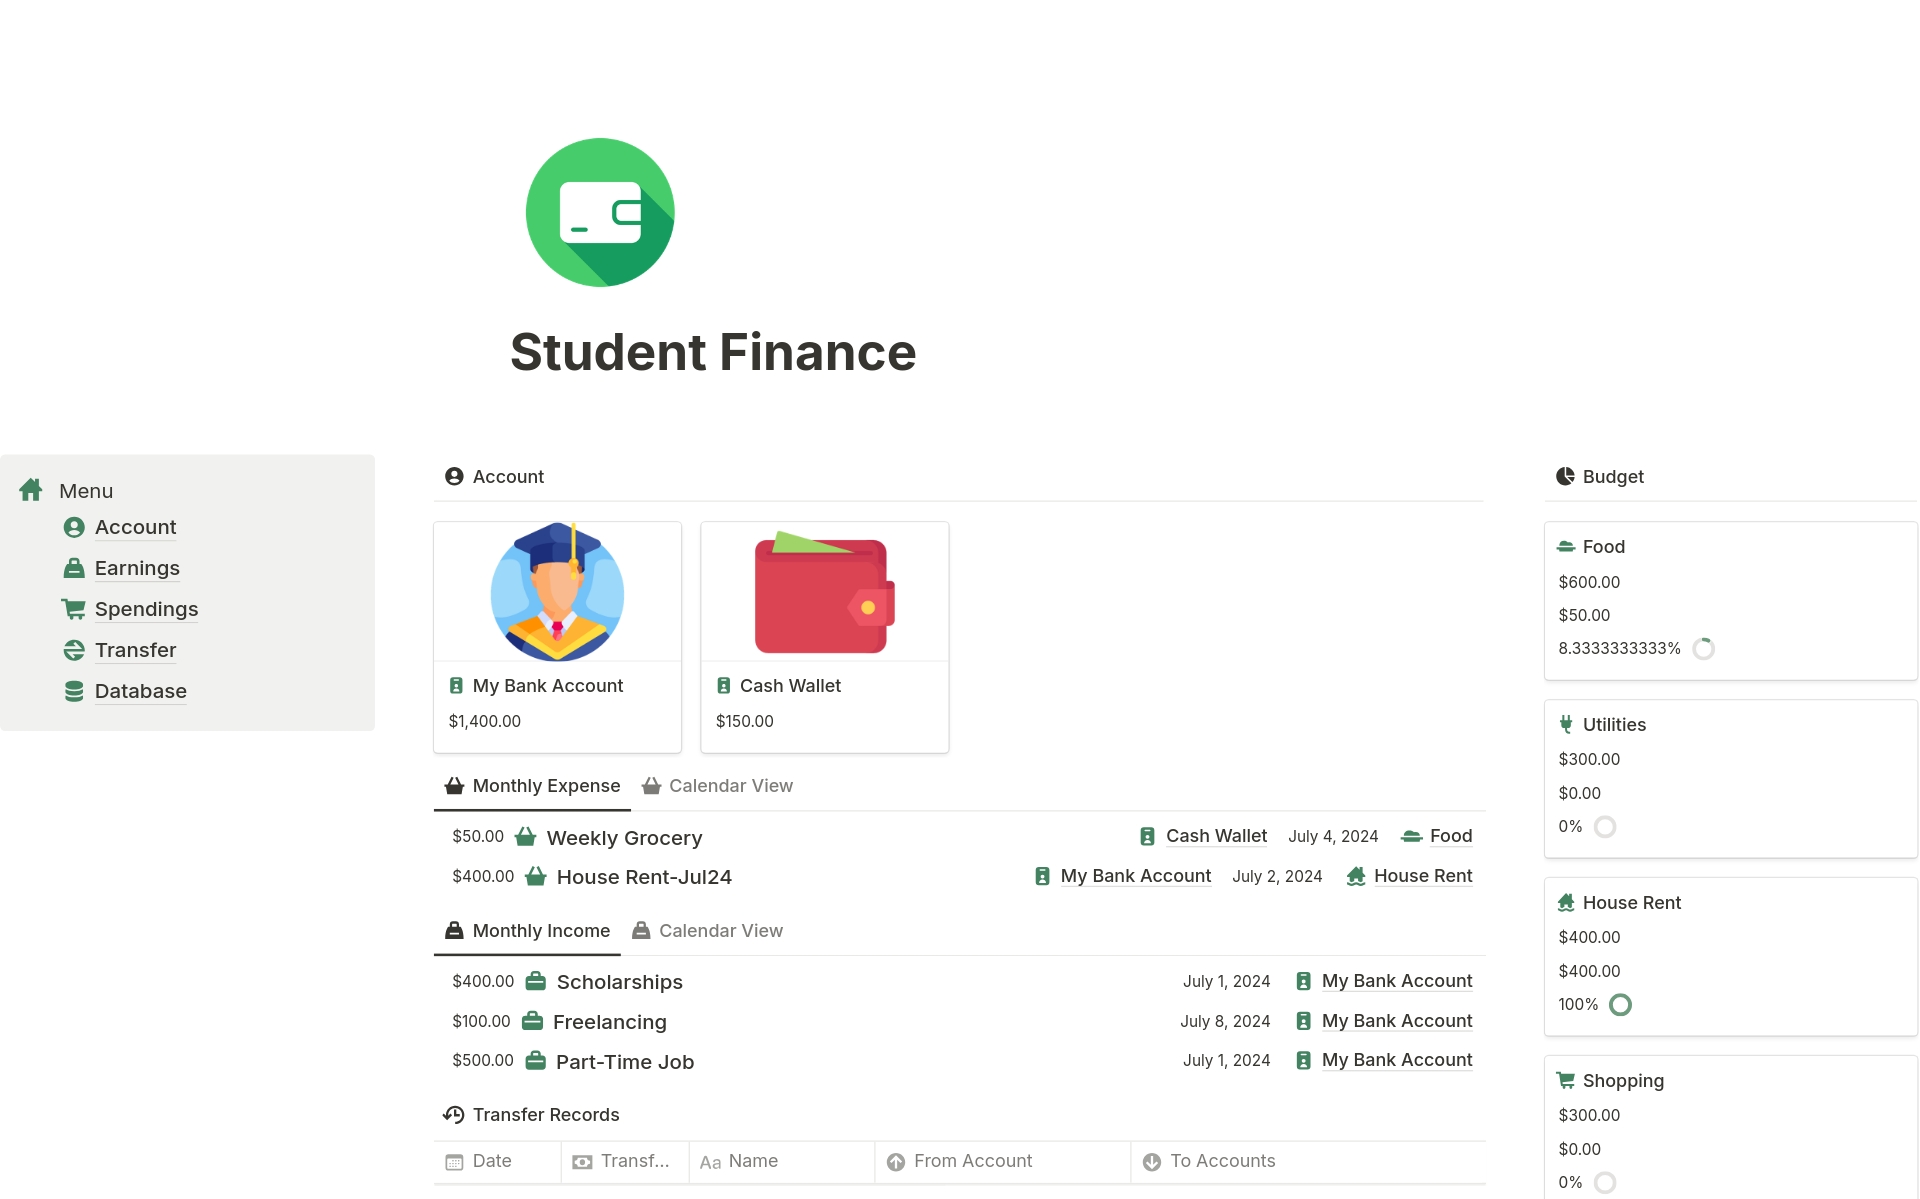 📚 Student Finance Notion Template

💰 Track Income
📊 Monitor Expenses
🔄 Manage Wallet Transfers
🏠 Categorize Spending (e.g., Rent)
📈 Get Financial Overview
⚙️ Customize as Needed
🗂️ Stay Organized

Secure your financial future with ease!